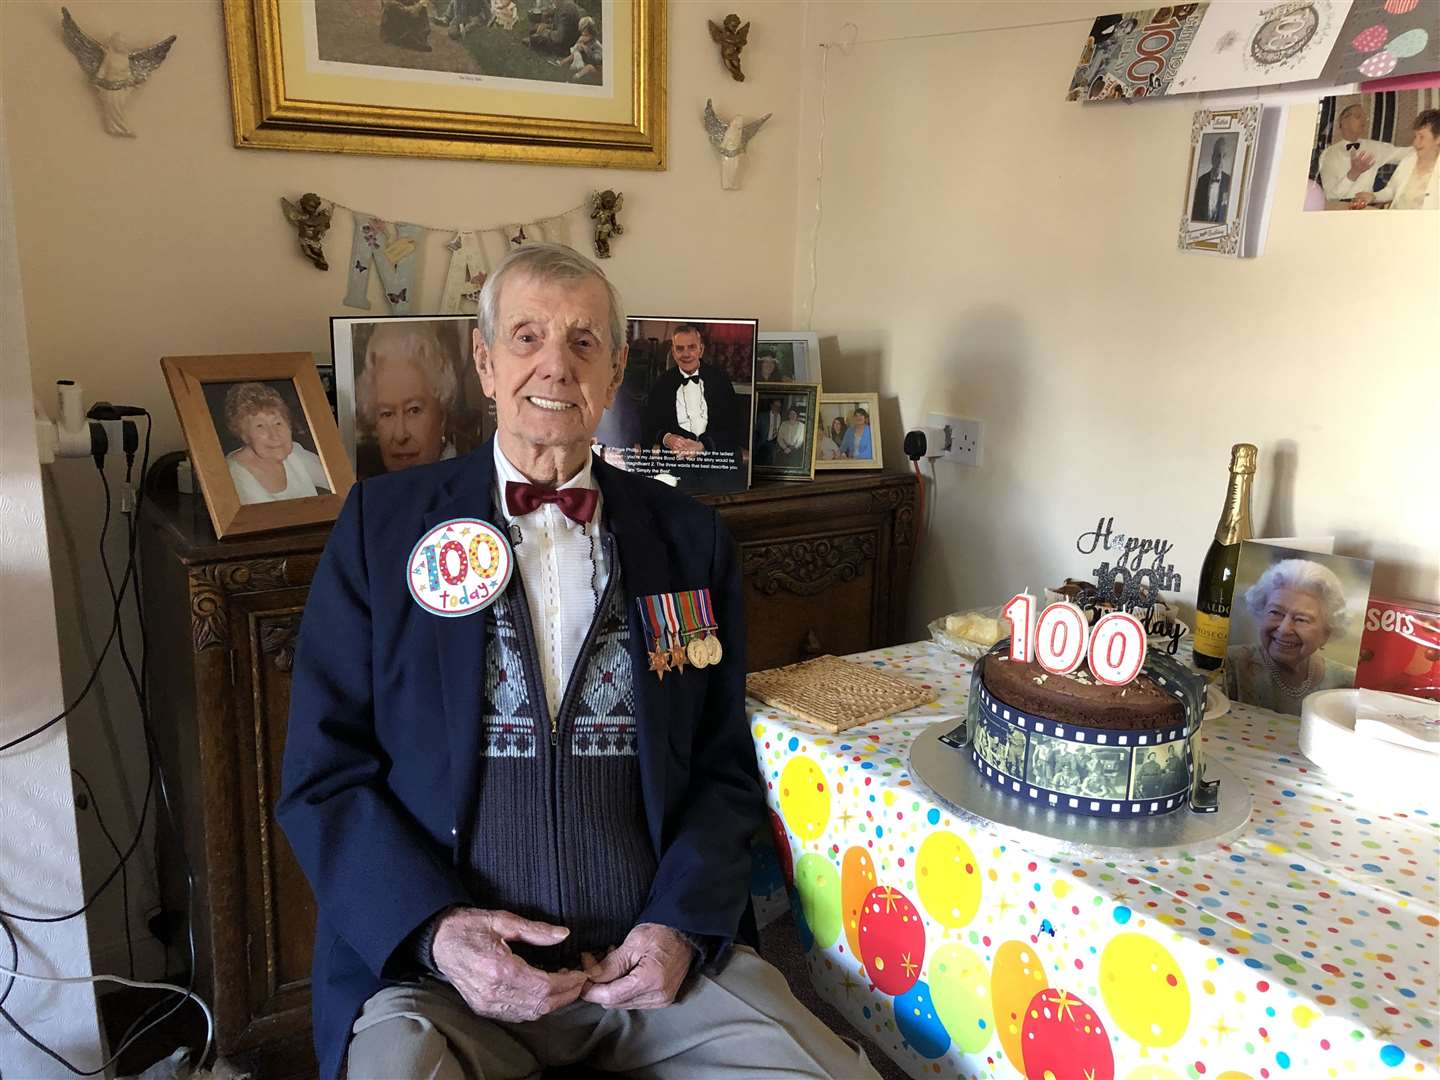 Charlie Pallett with his 100th birthday cake